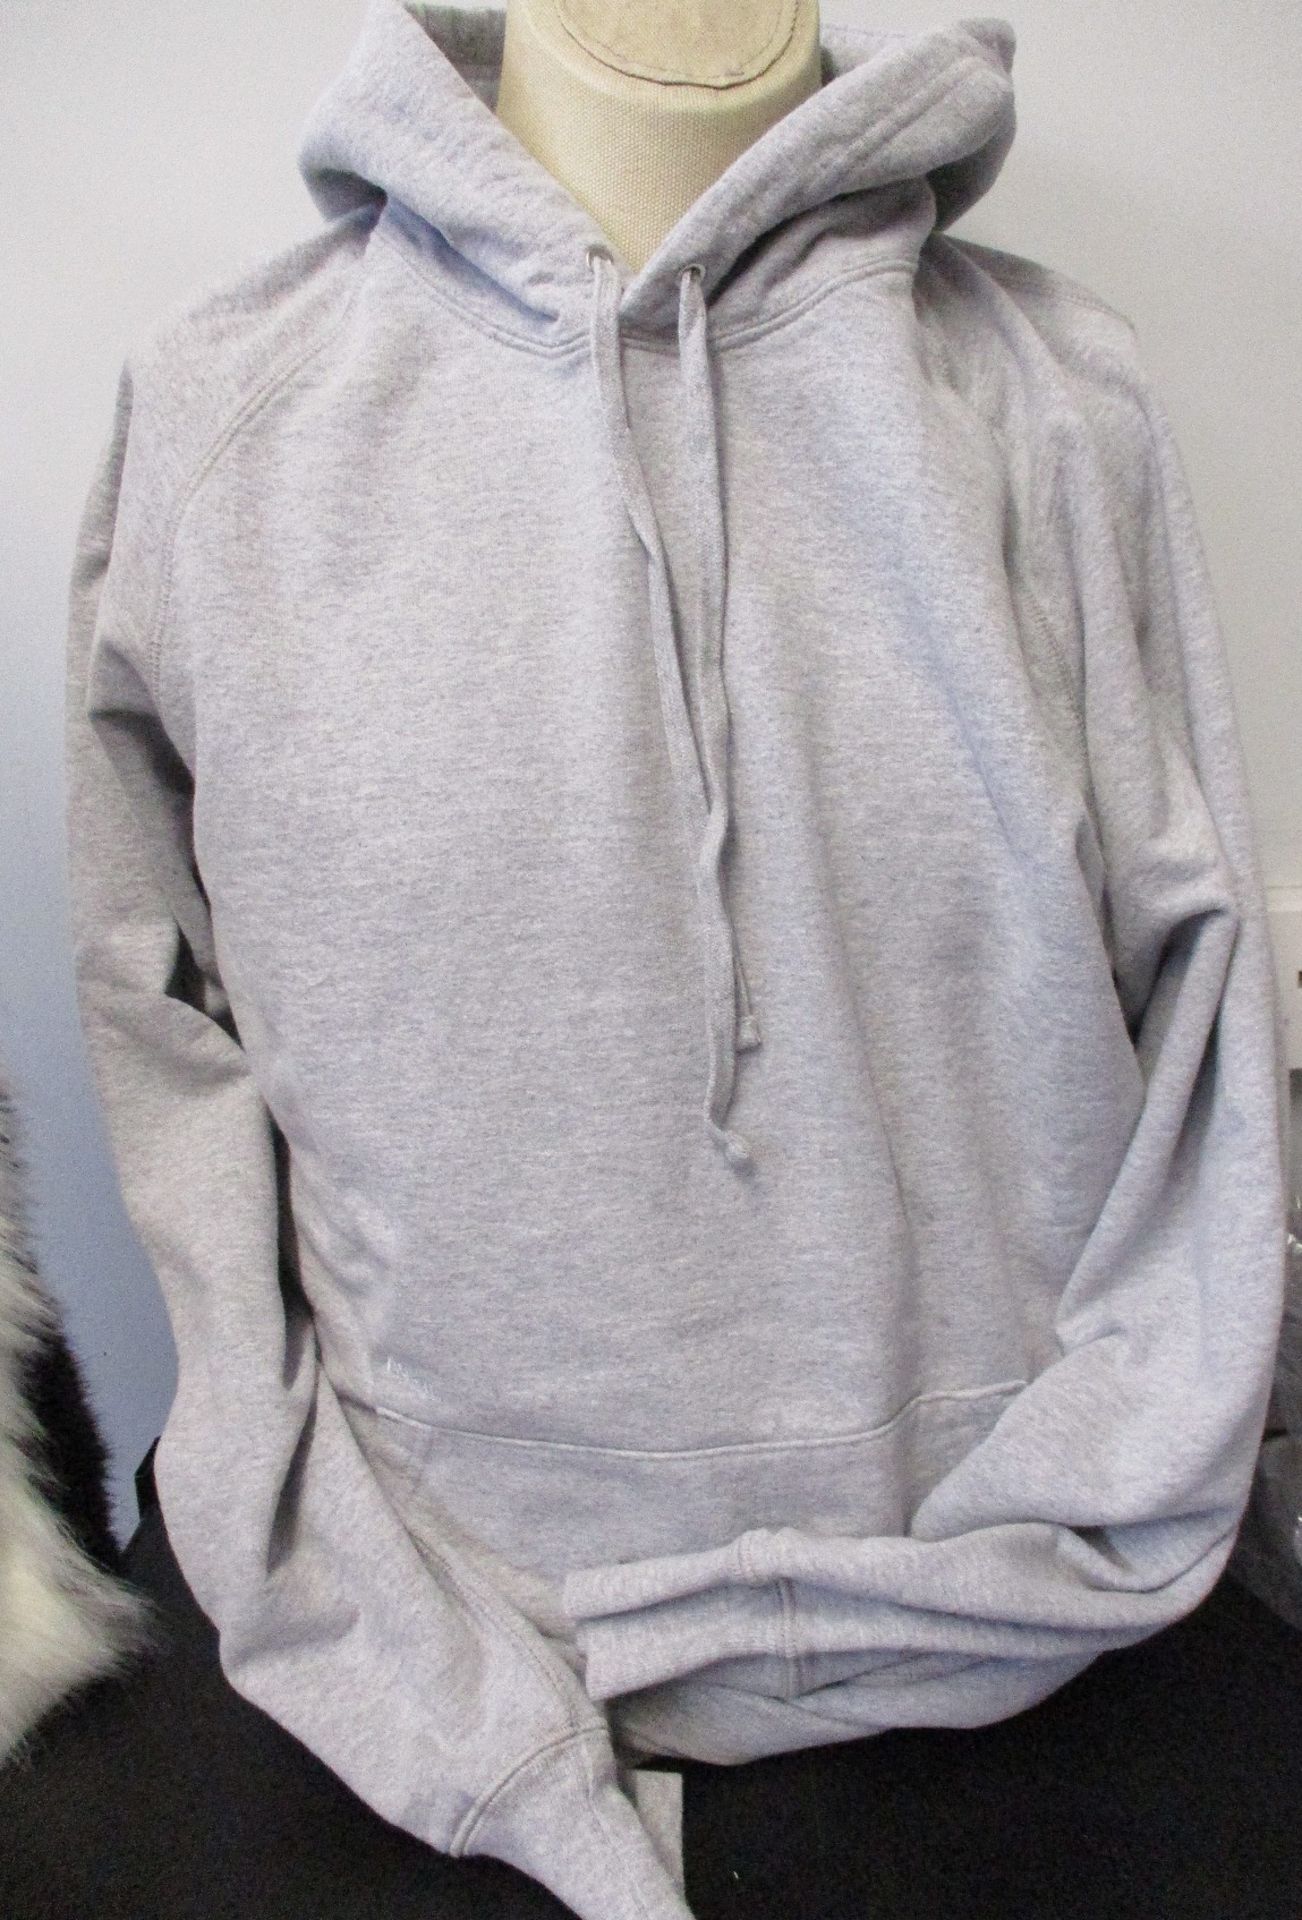 Two as new Adsum Classic Logo hoodies in ash heather grey (S, M - RRP £95 each).